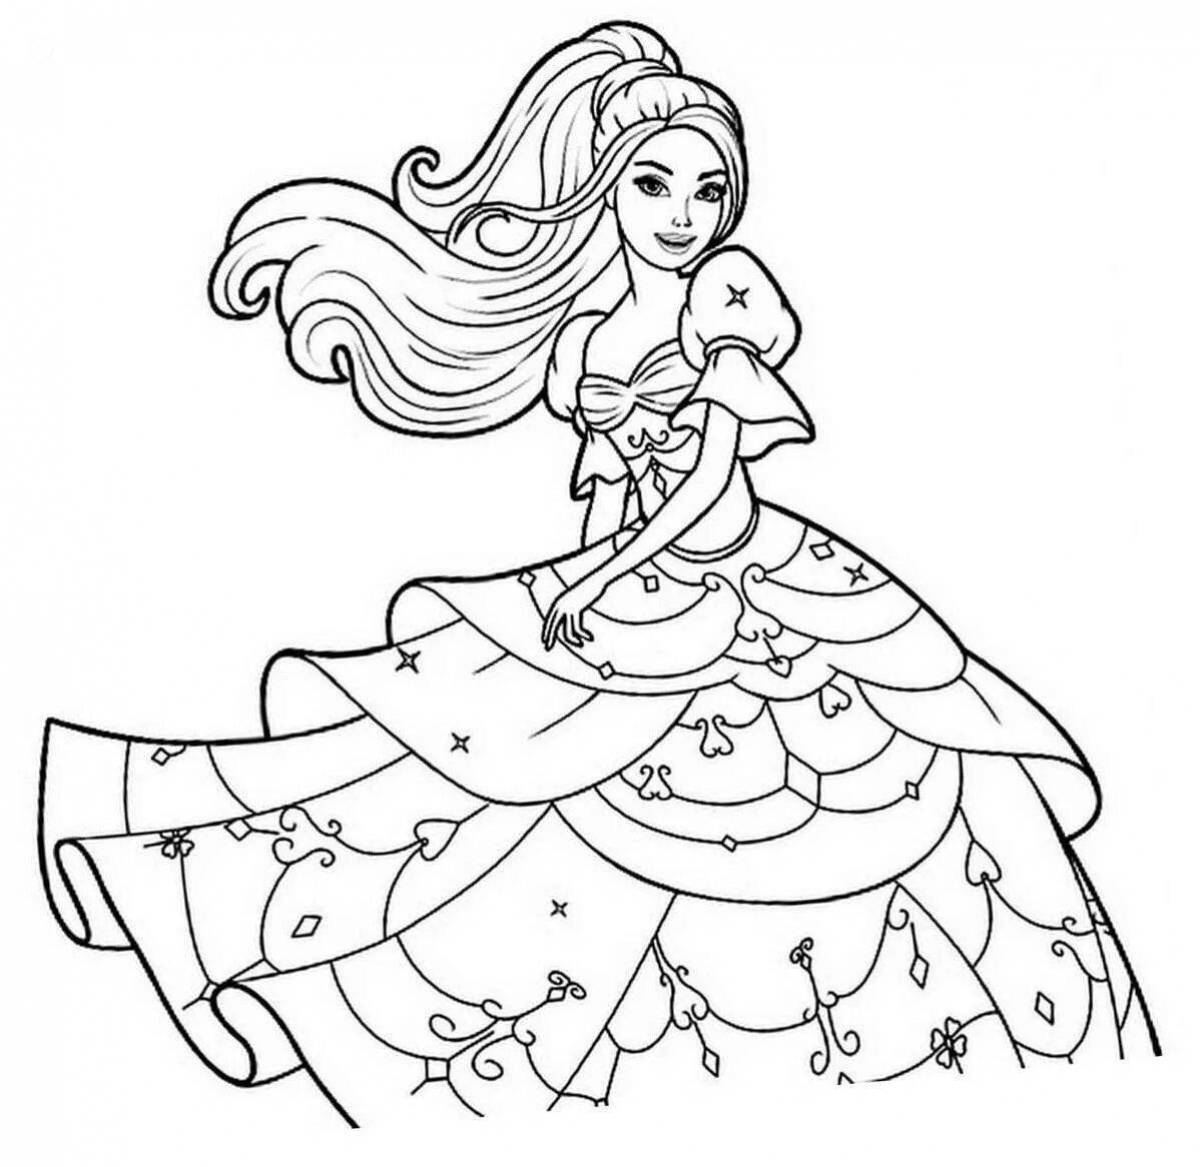 Fun coloring pages for 5 year old girls